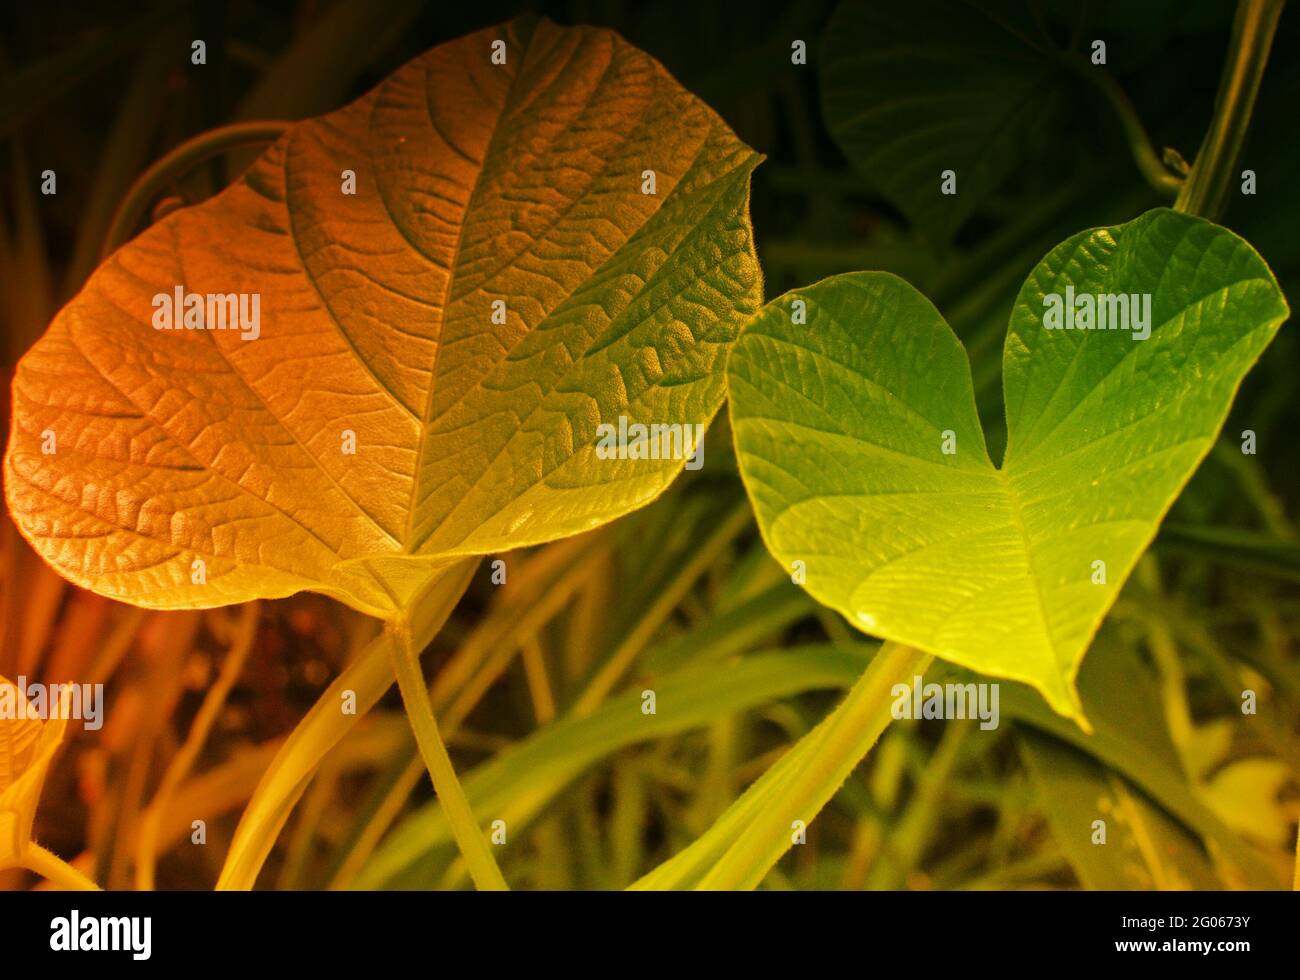 Green leaves, texture of nature, stock photograph with natural background, filtered image Stock Photo